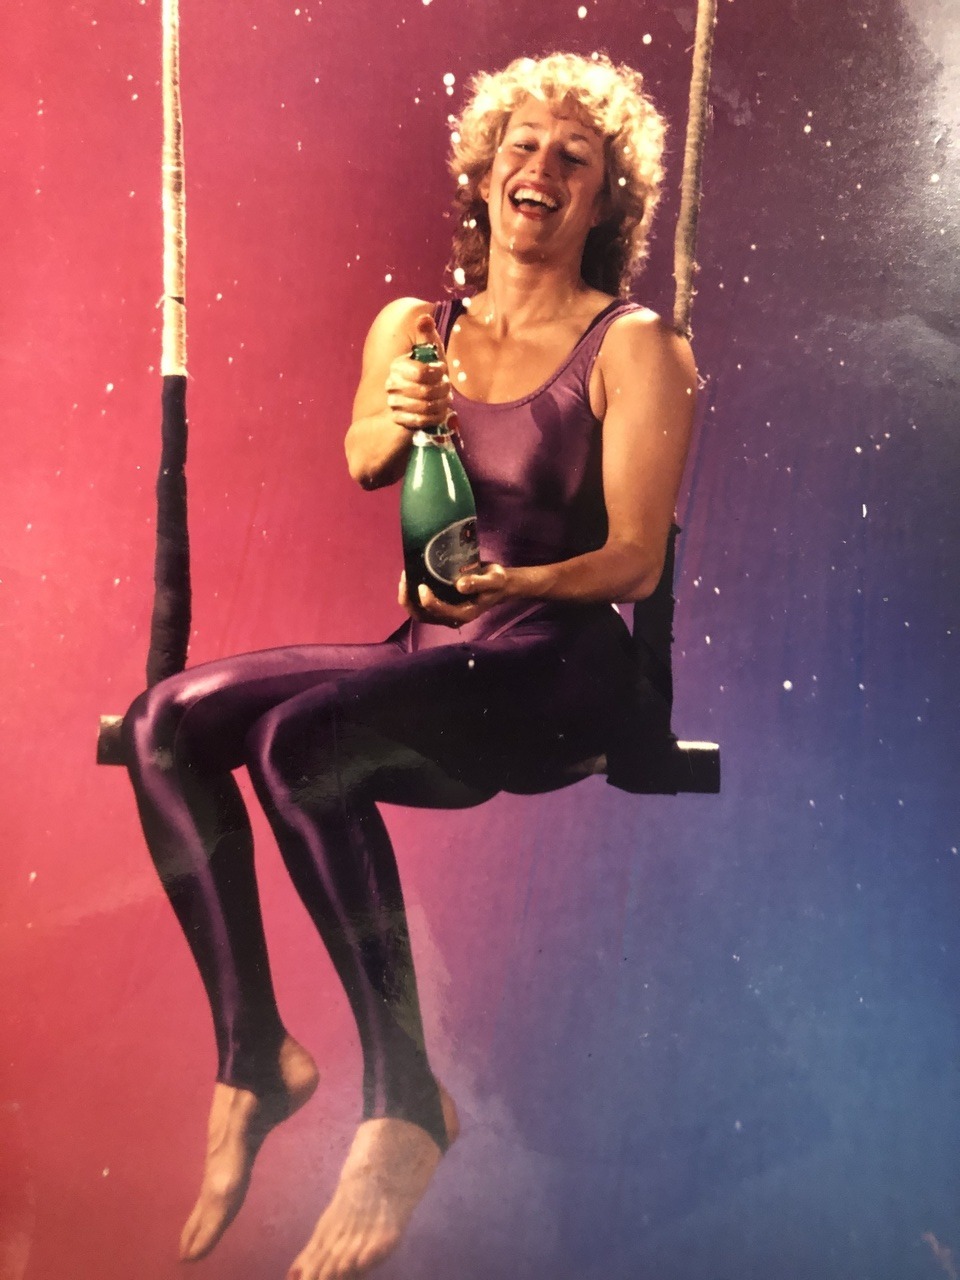 Gayle on trapeze